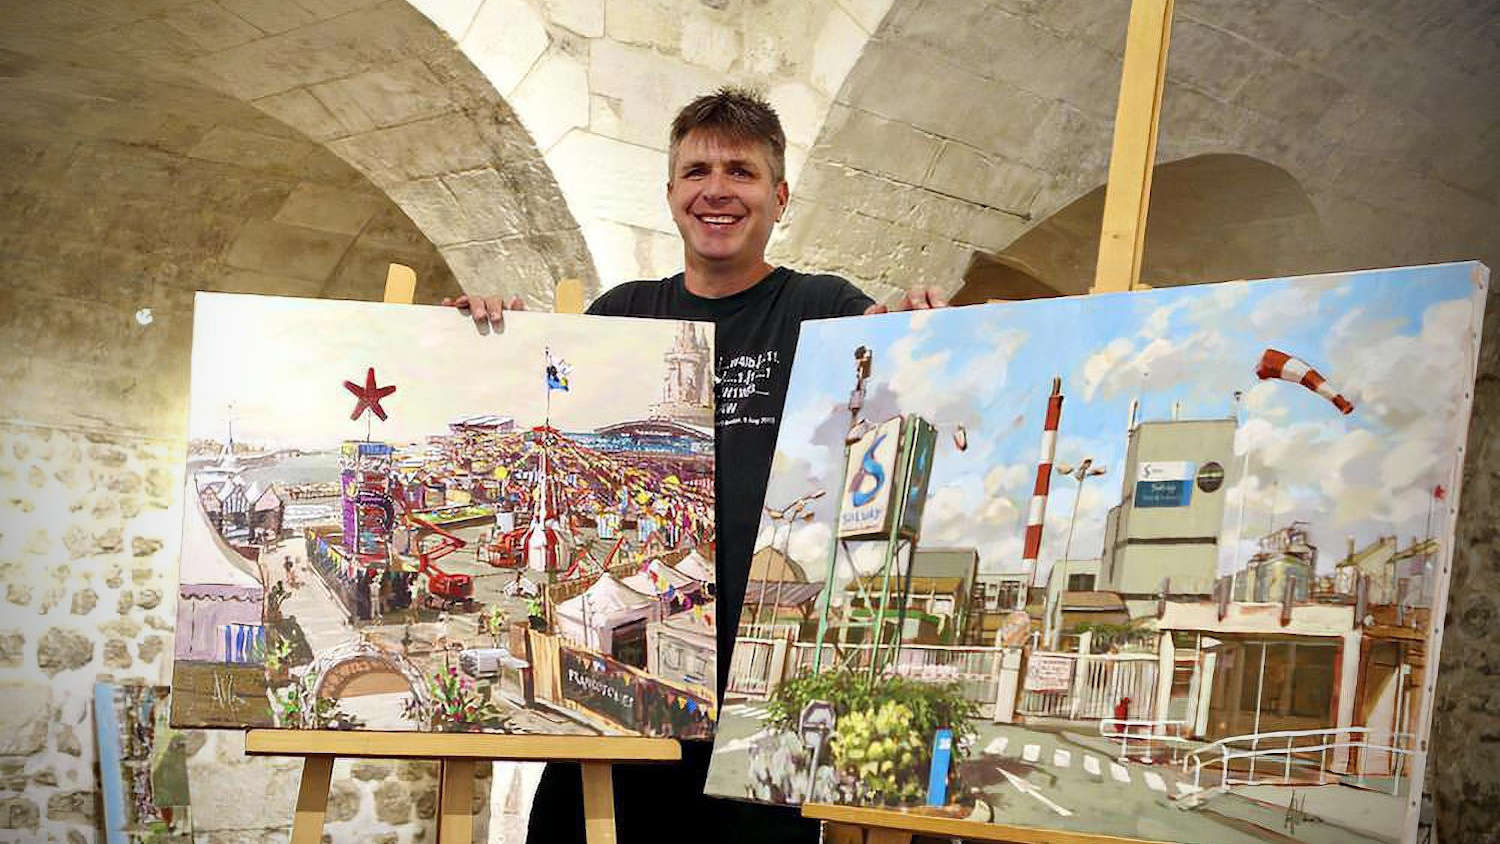 allan with two of his finished paintings